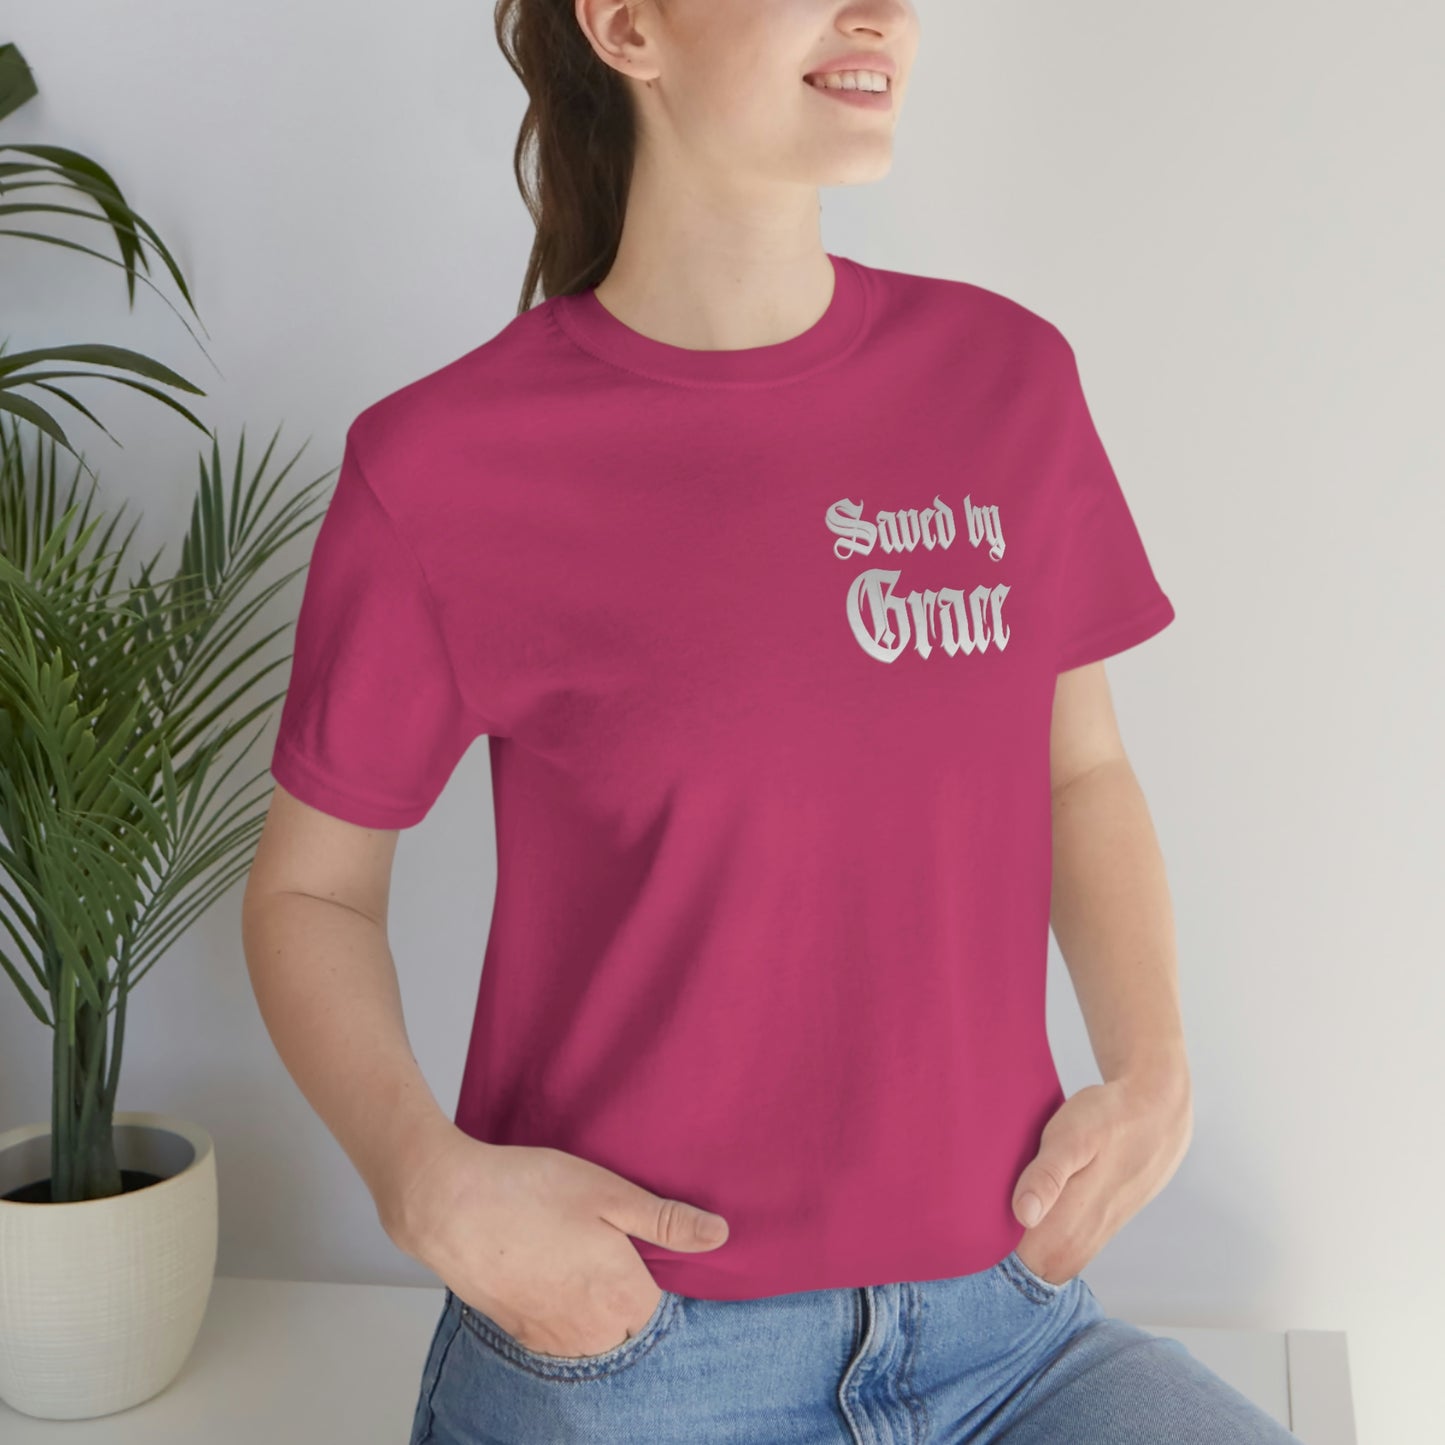 Saved By Grace Mens T-Shirt